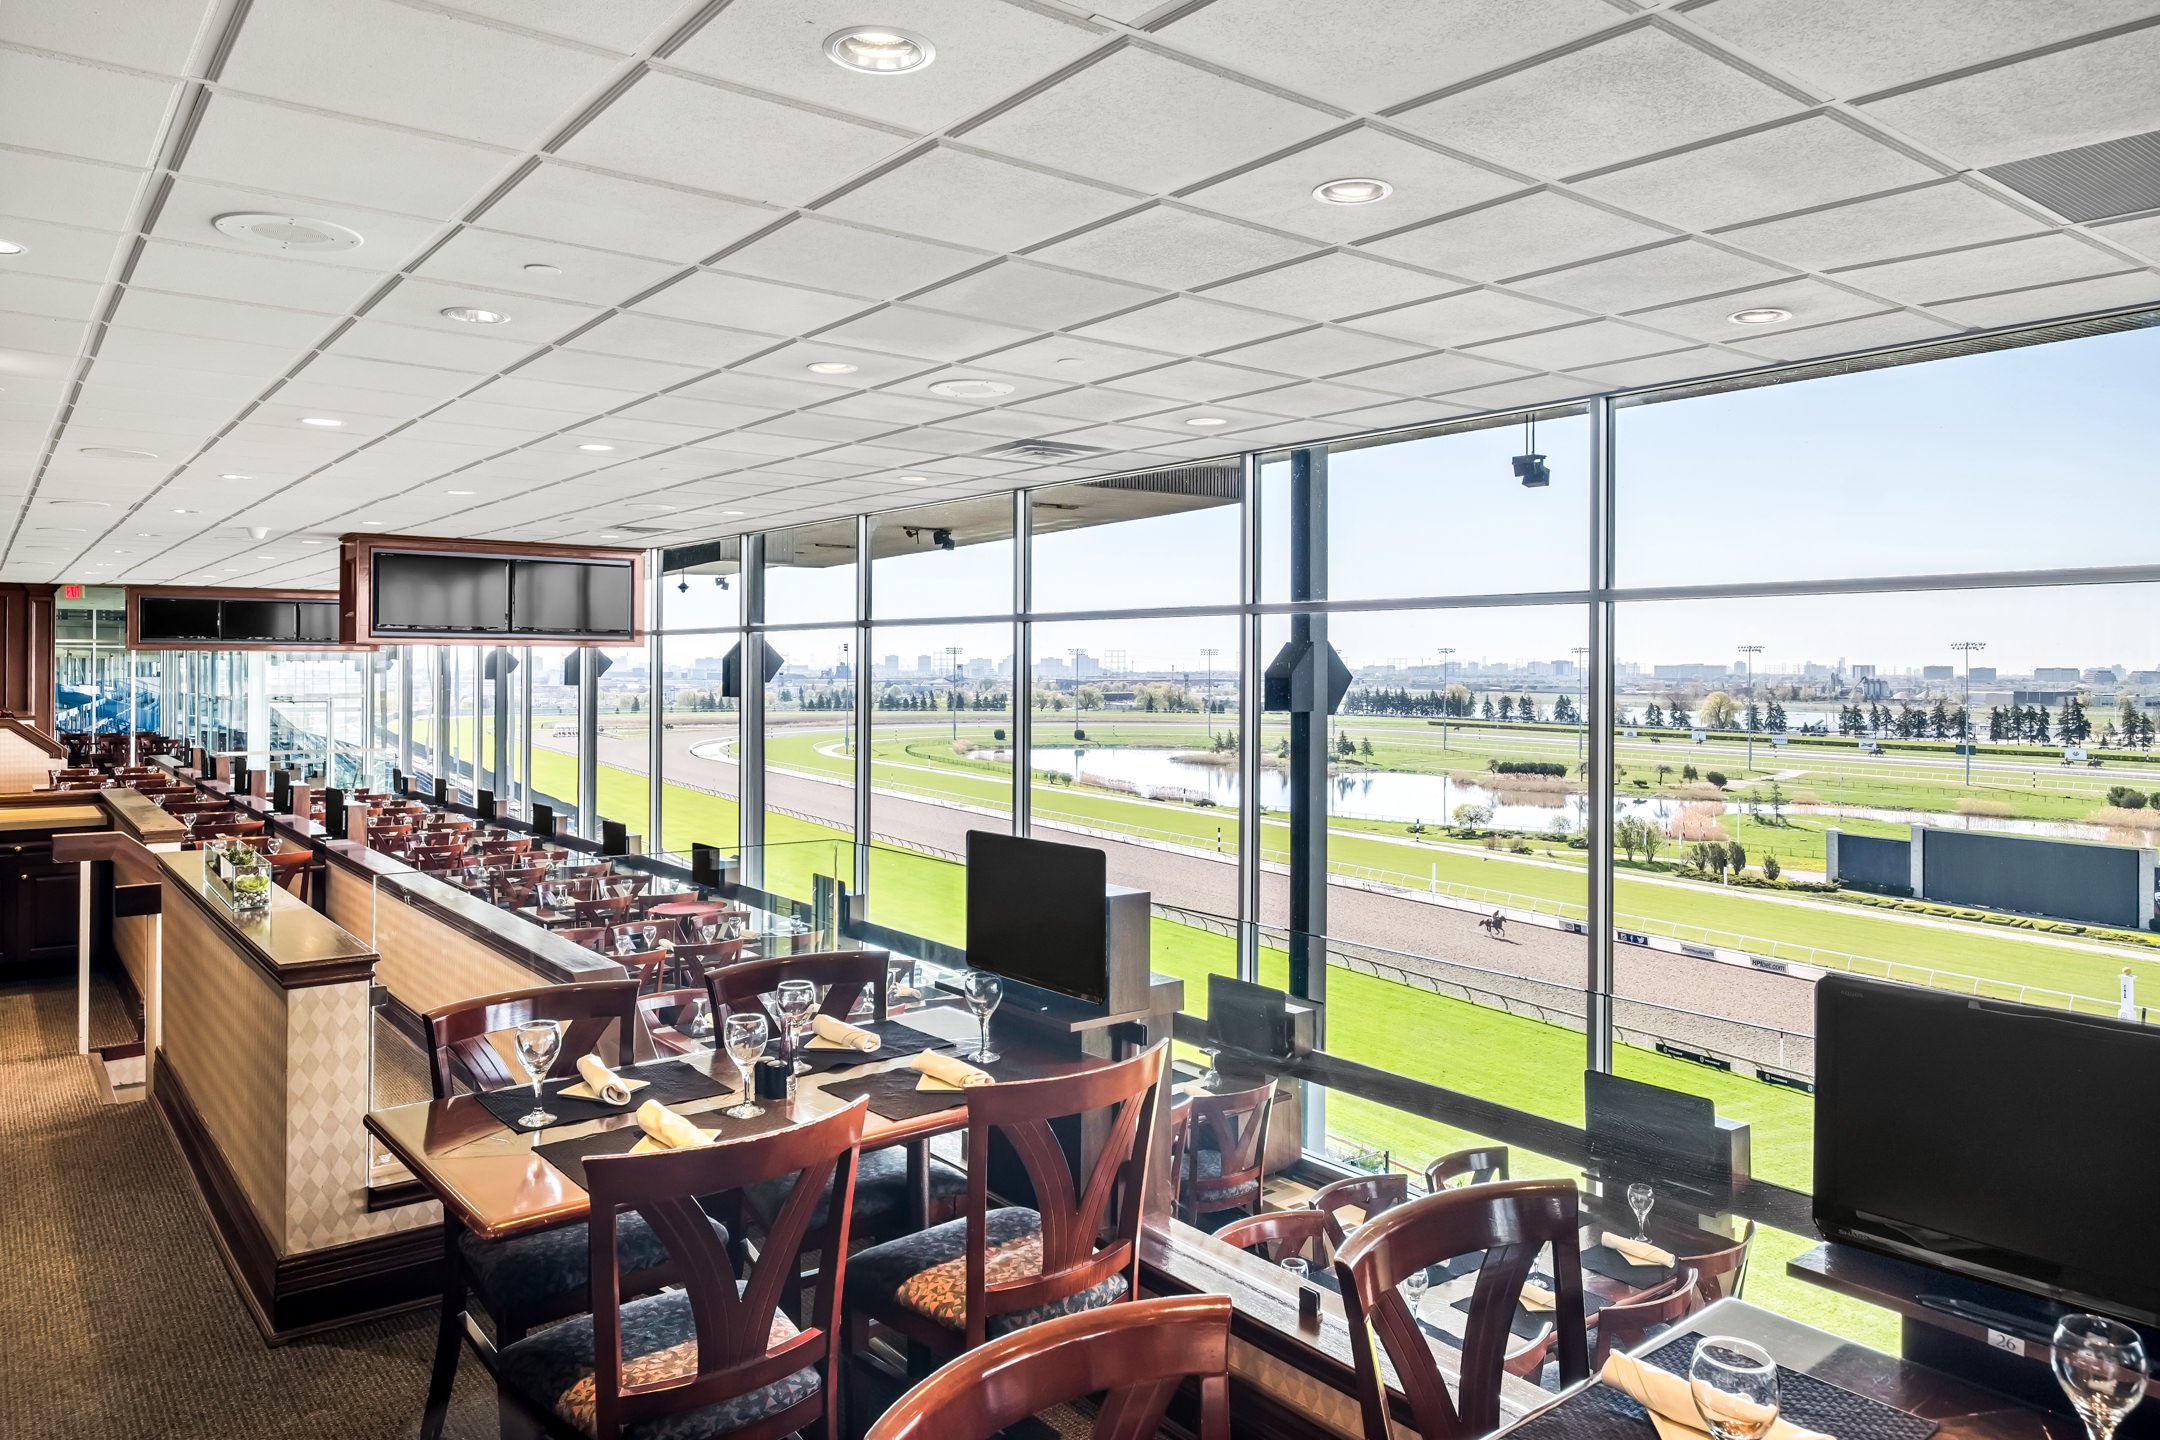 Track facing view of the Woodbine Club Restaurant at Woodbine Racetrack